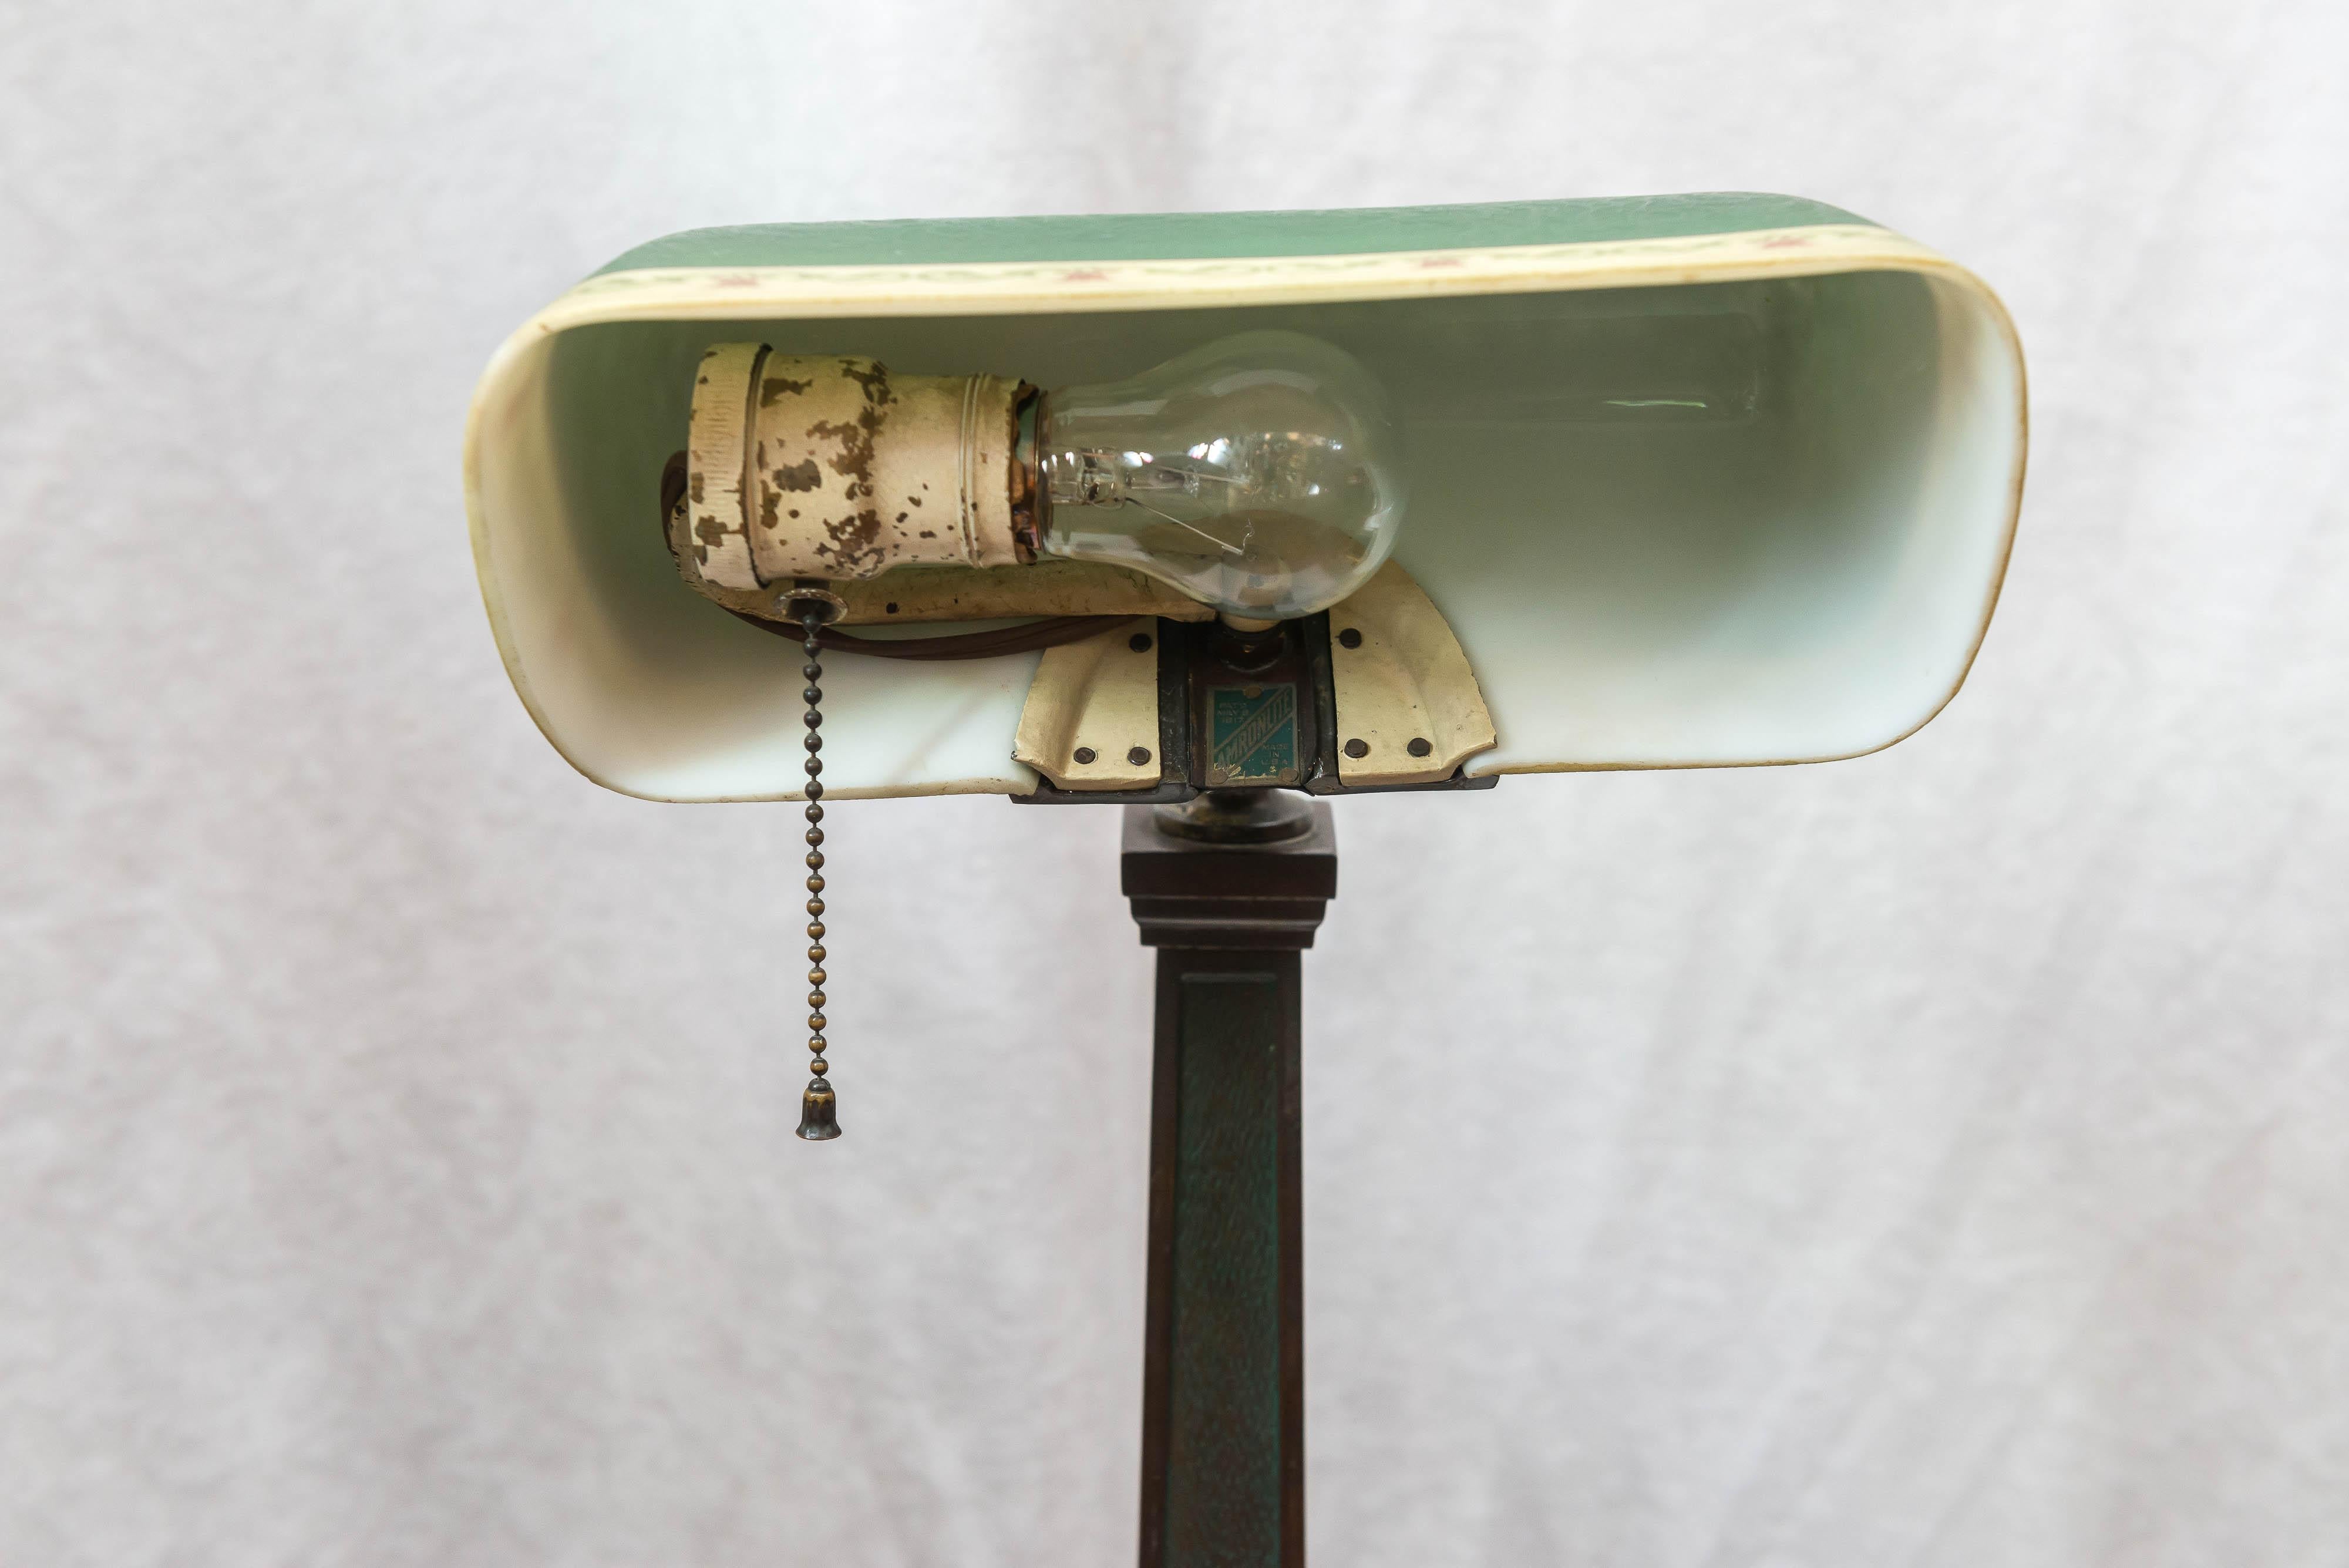 For those looking for the typical antique banker's lamp, stop, we have one that is a cut above the rest. Multiple companies made banker's lamps with Emeralite being the most known, however Amronlite made lamps of comparable quality. Finding one with